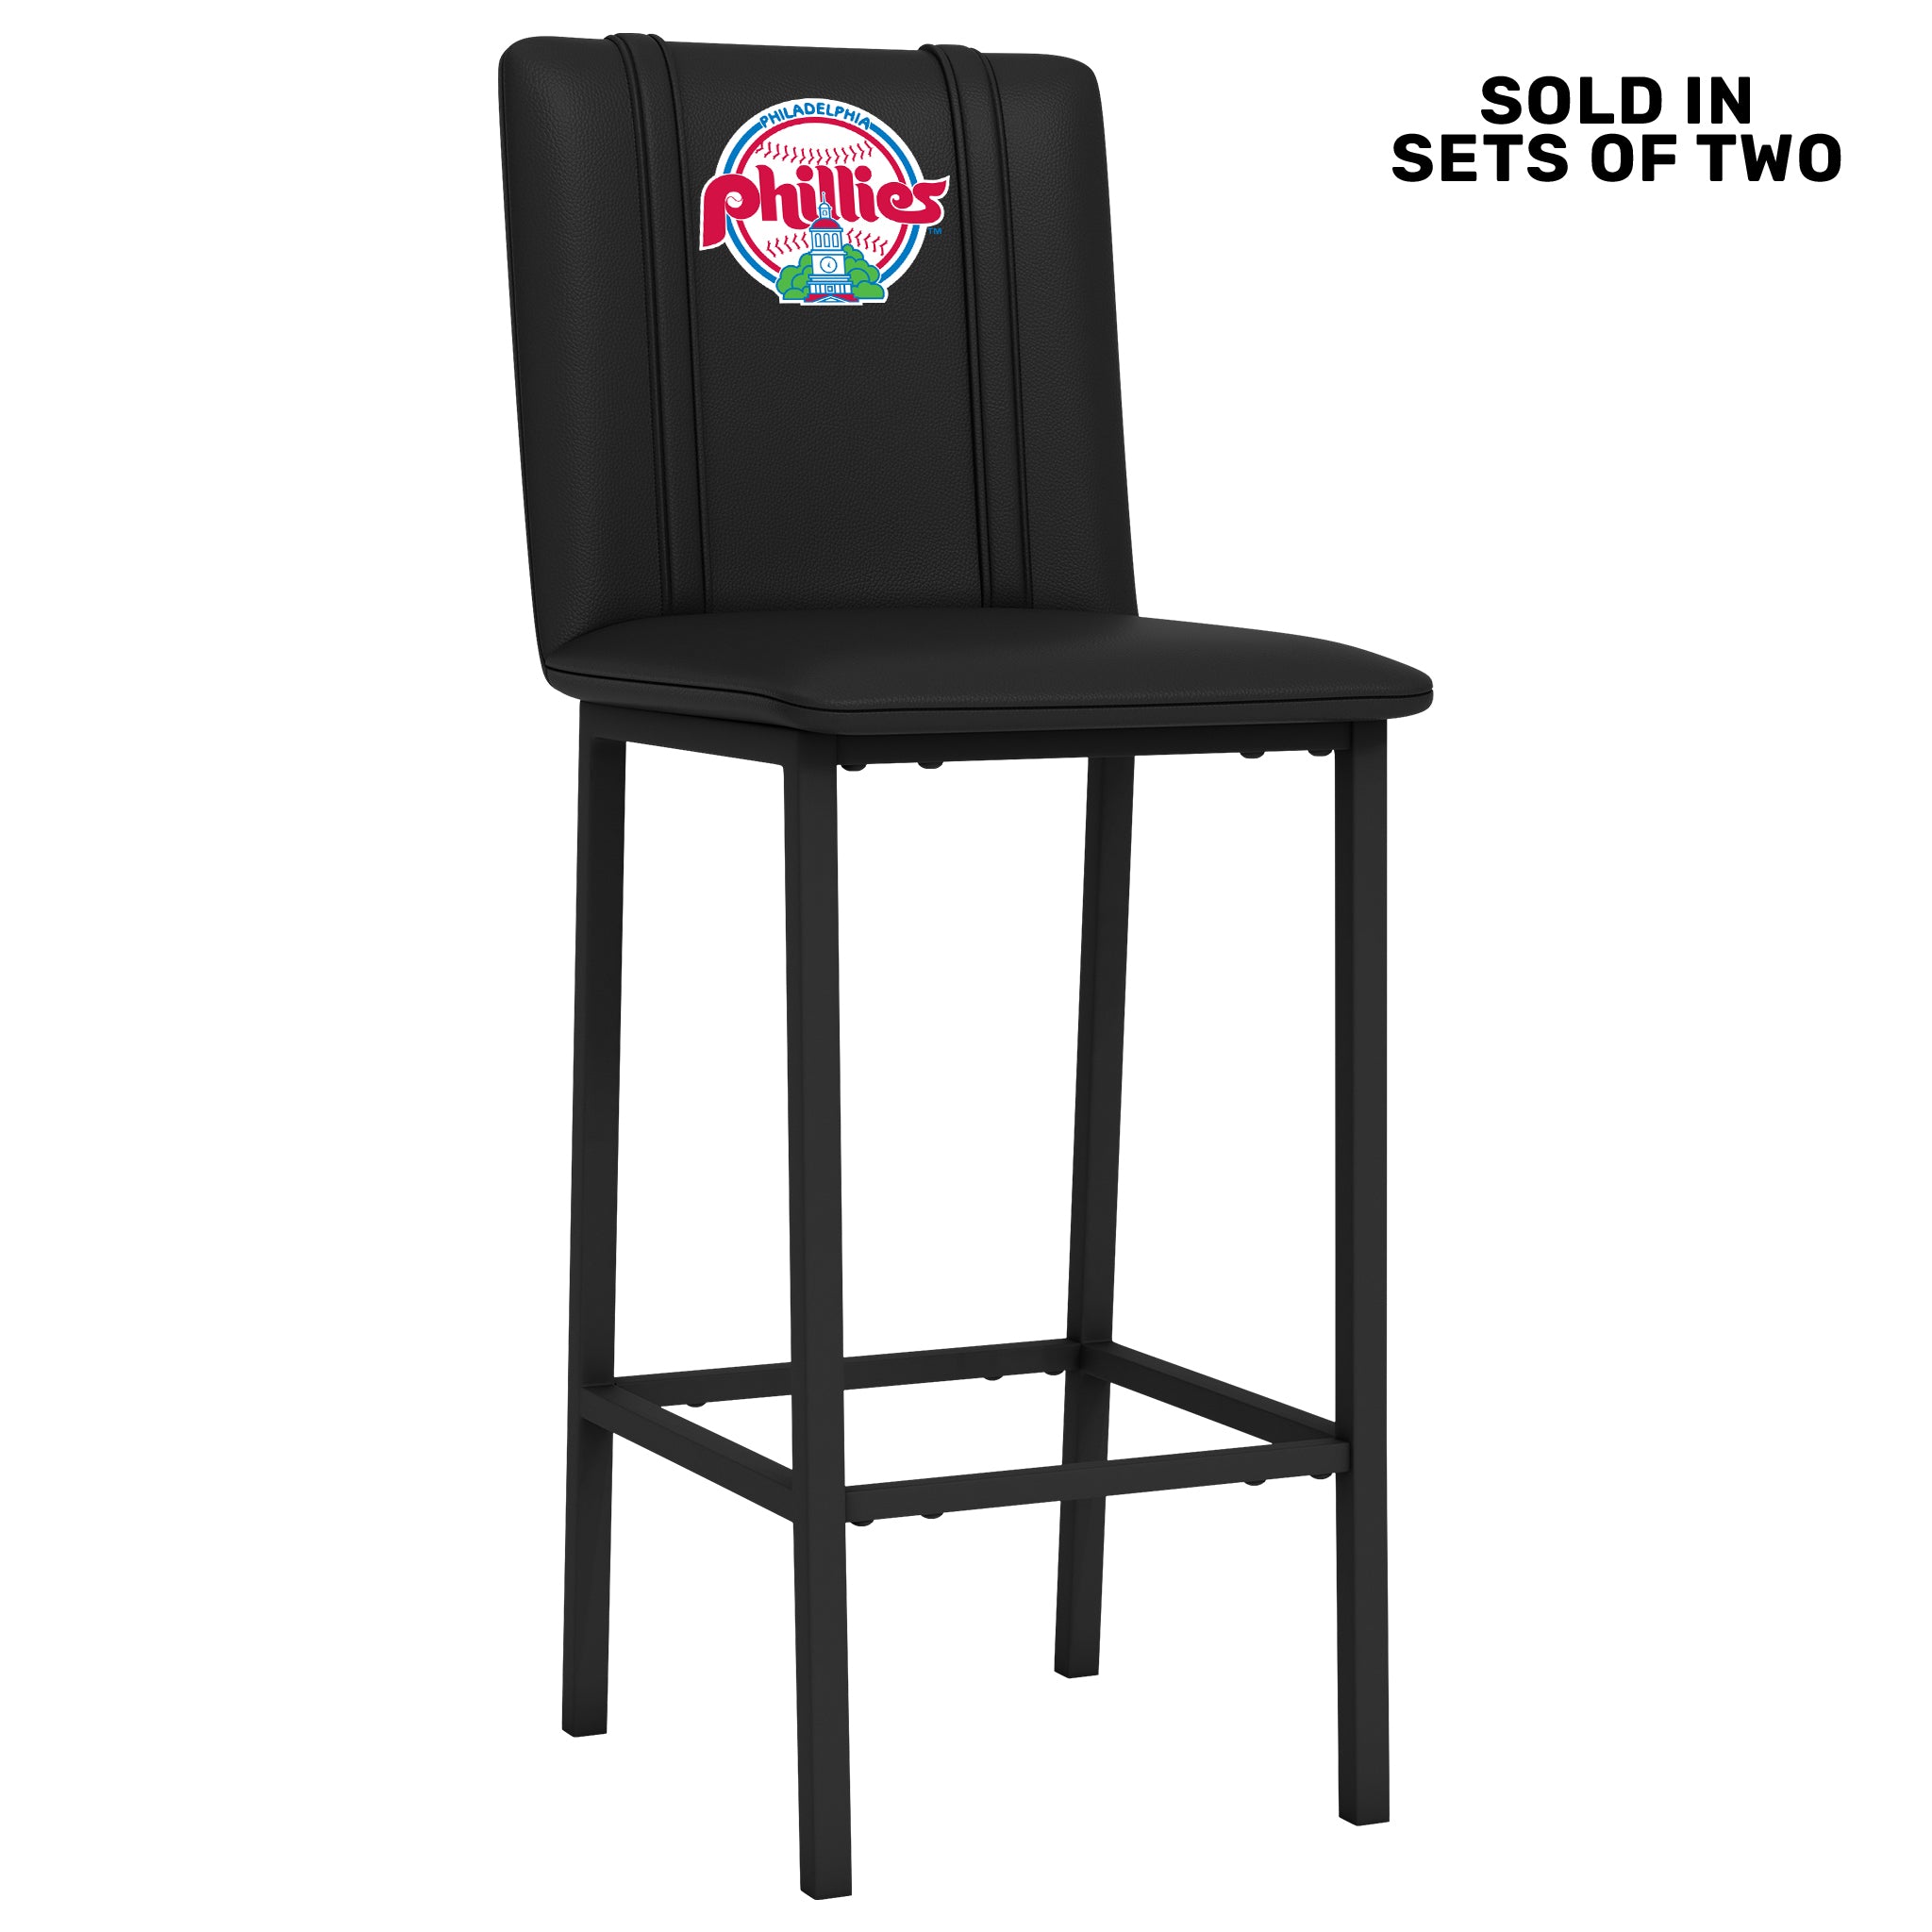 Bar Stool 500 with Philadelphia Phillies Cooperstown Primary Set of 2